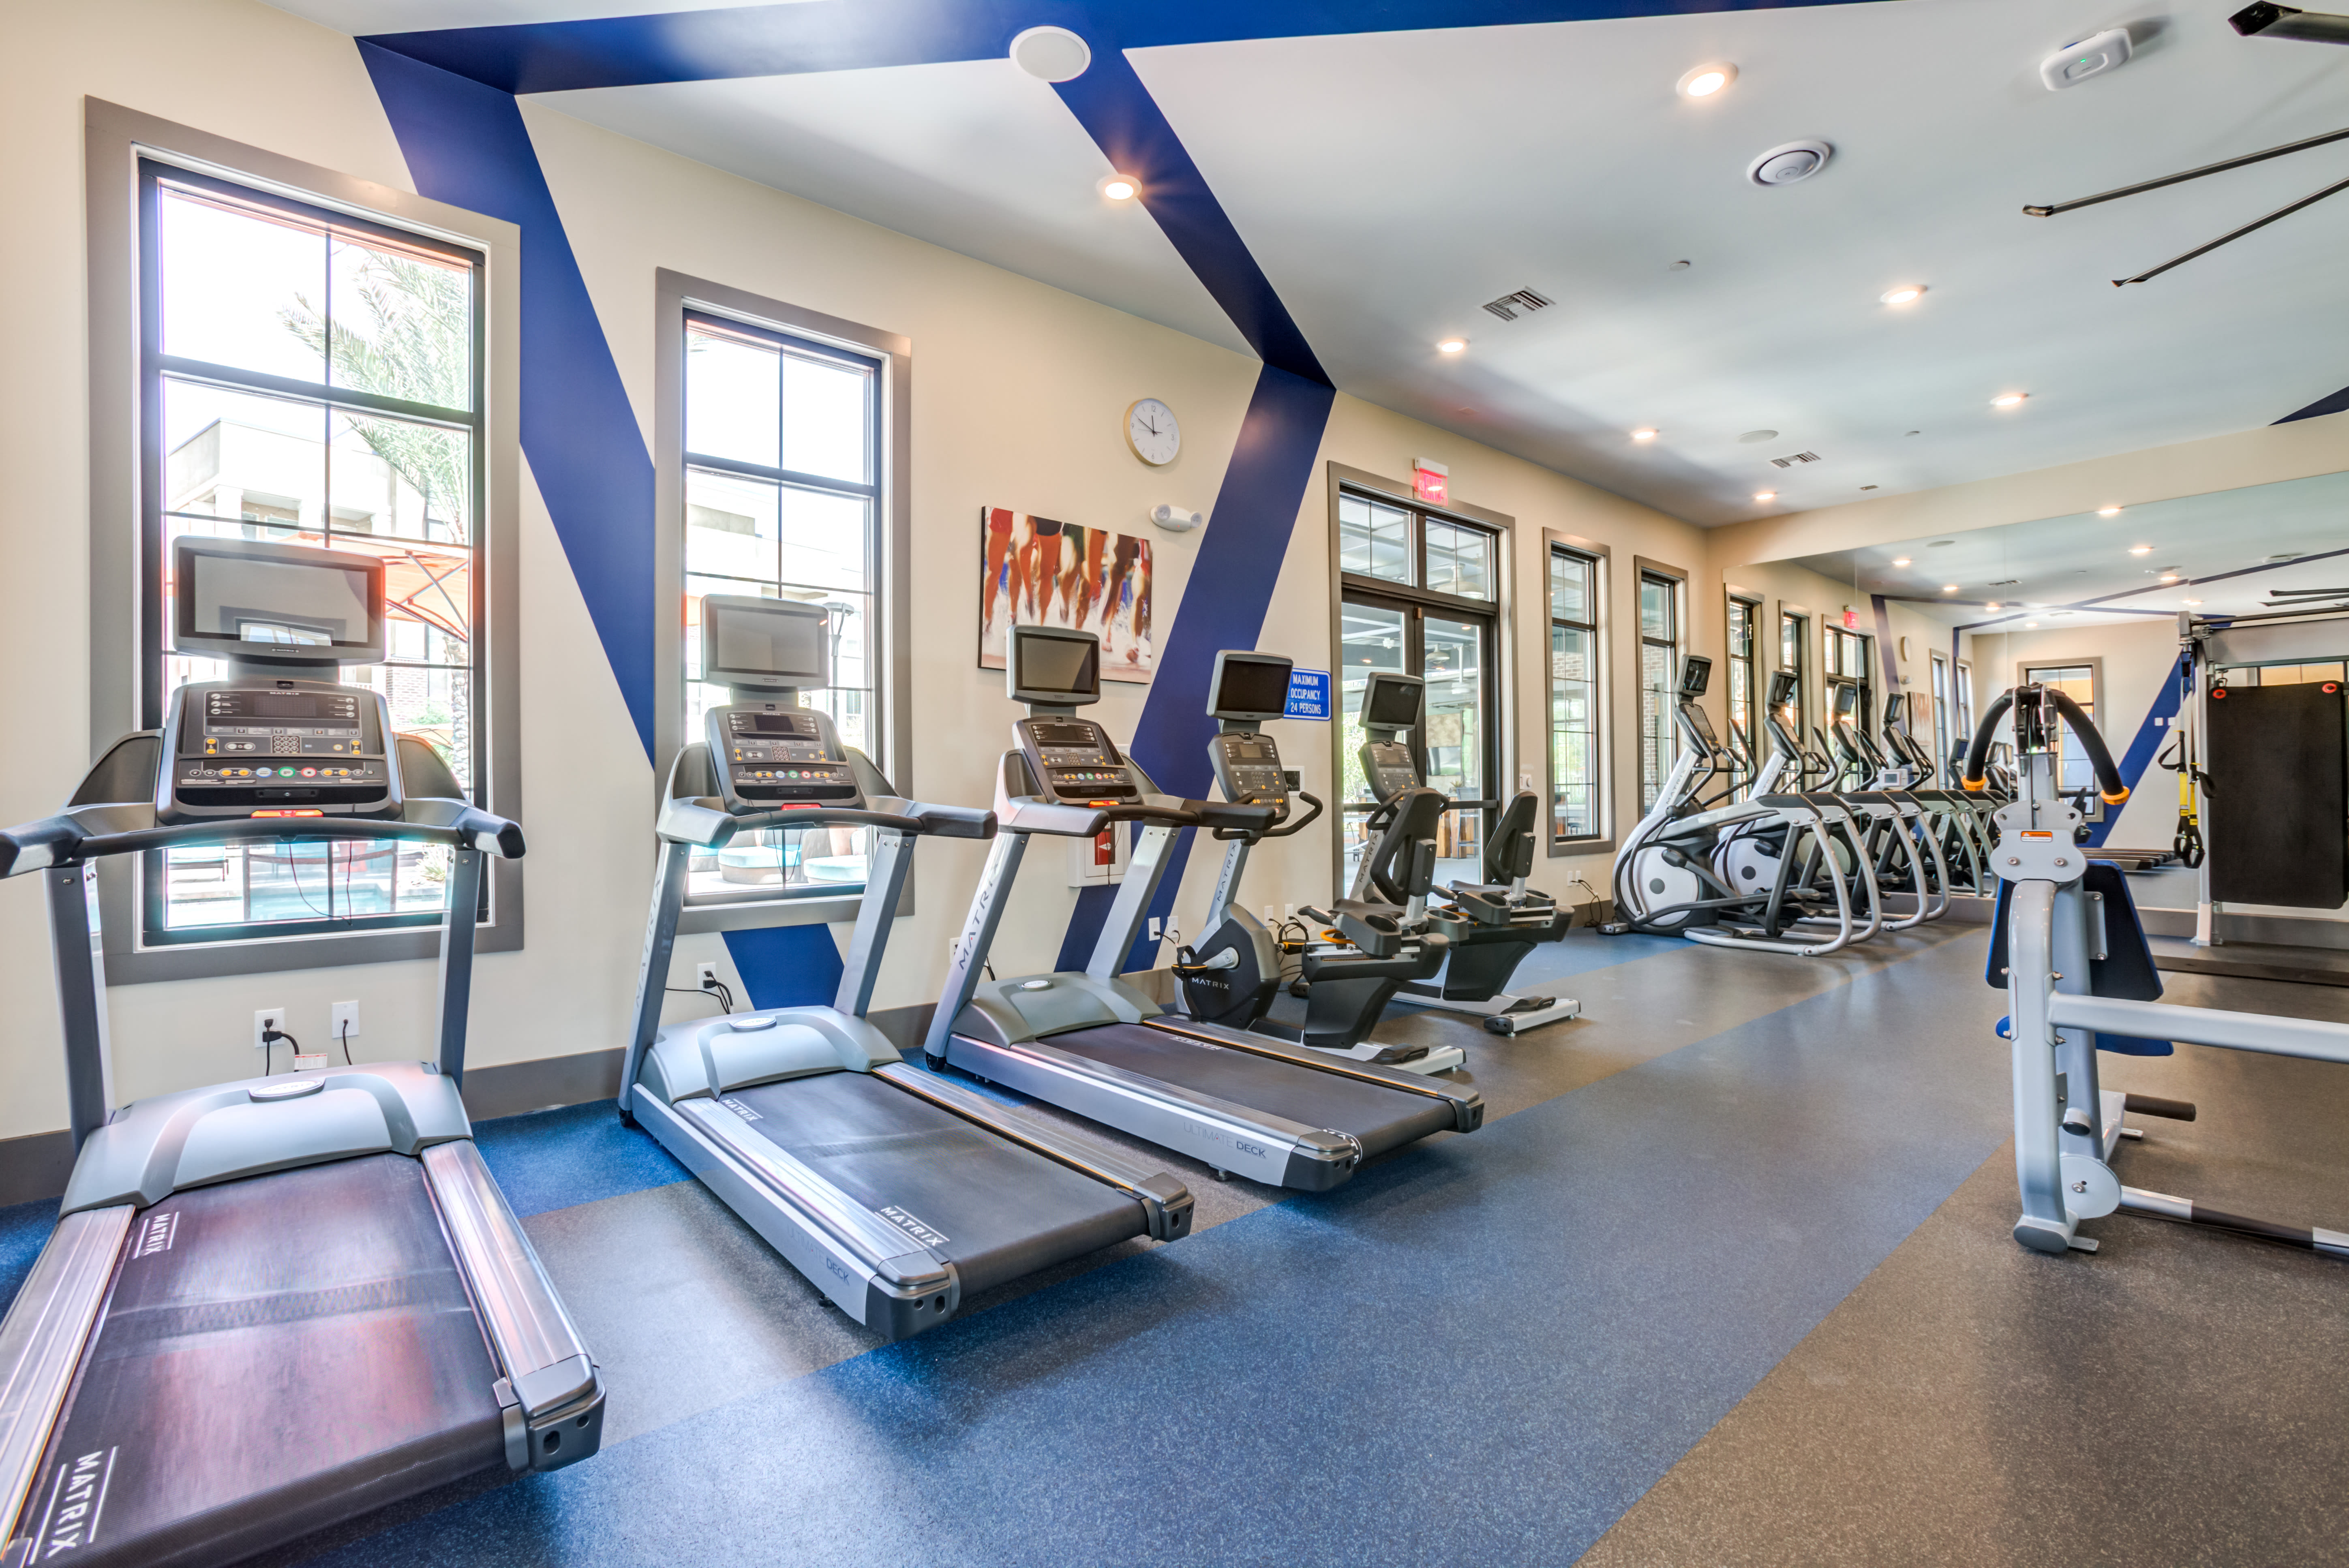 Fitness center at Town Commons in Gilbert, Arizona